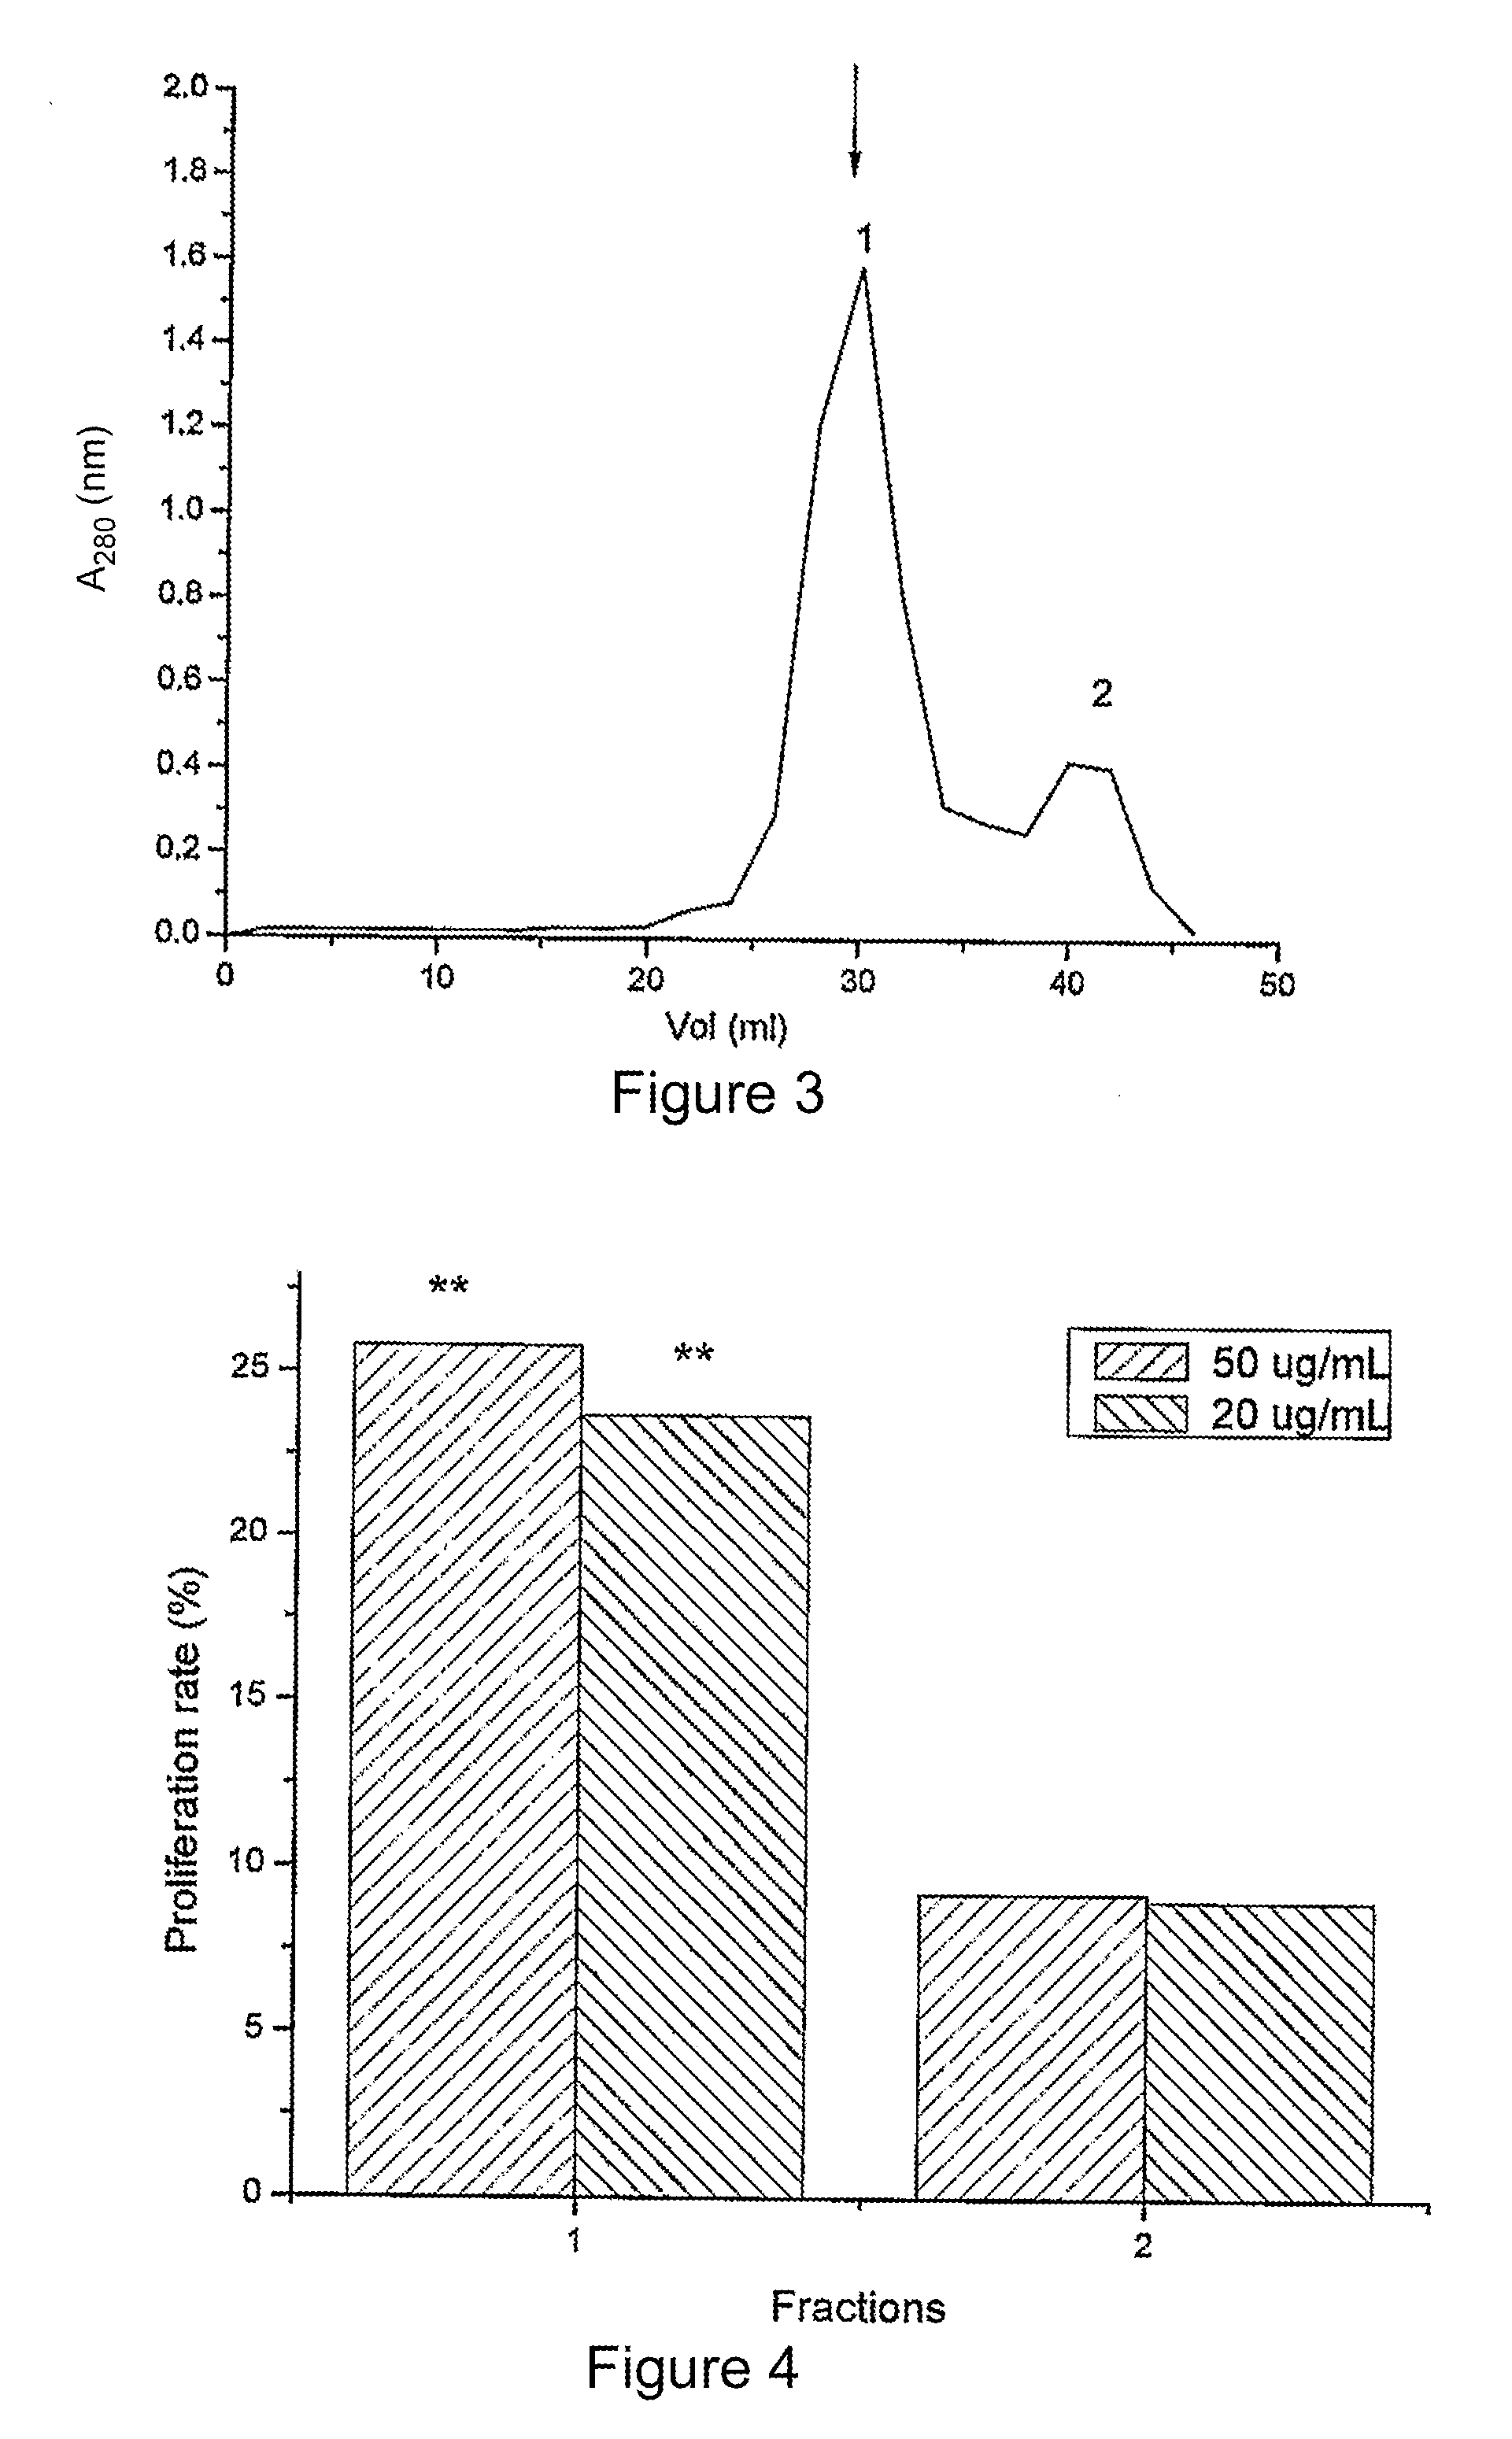 Method for Isolating and Purifying Immuno-Modulating Polypeptide from Cow Placenta